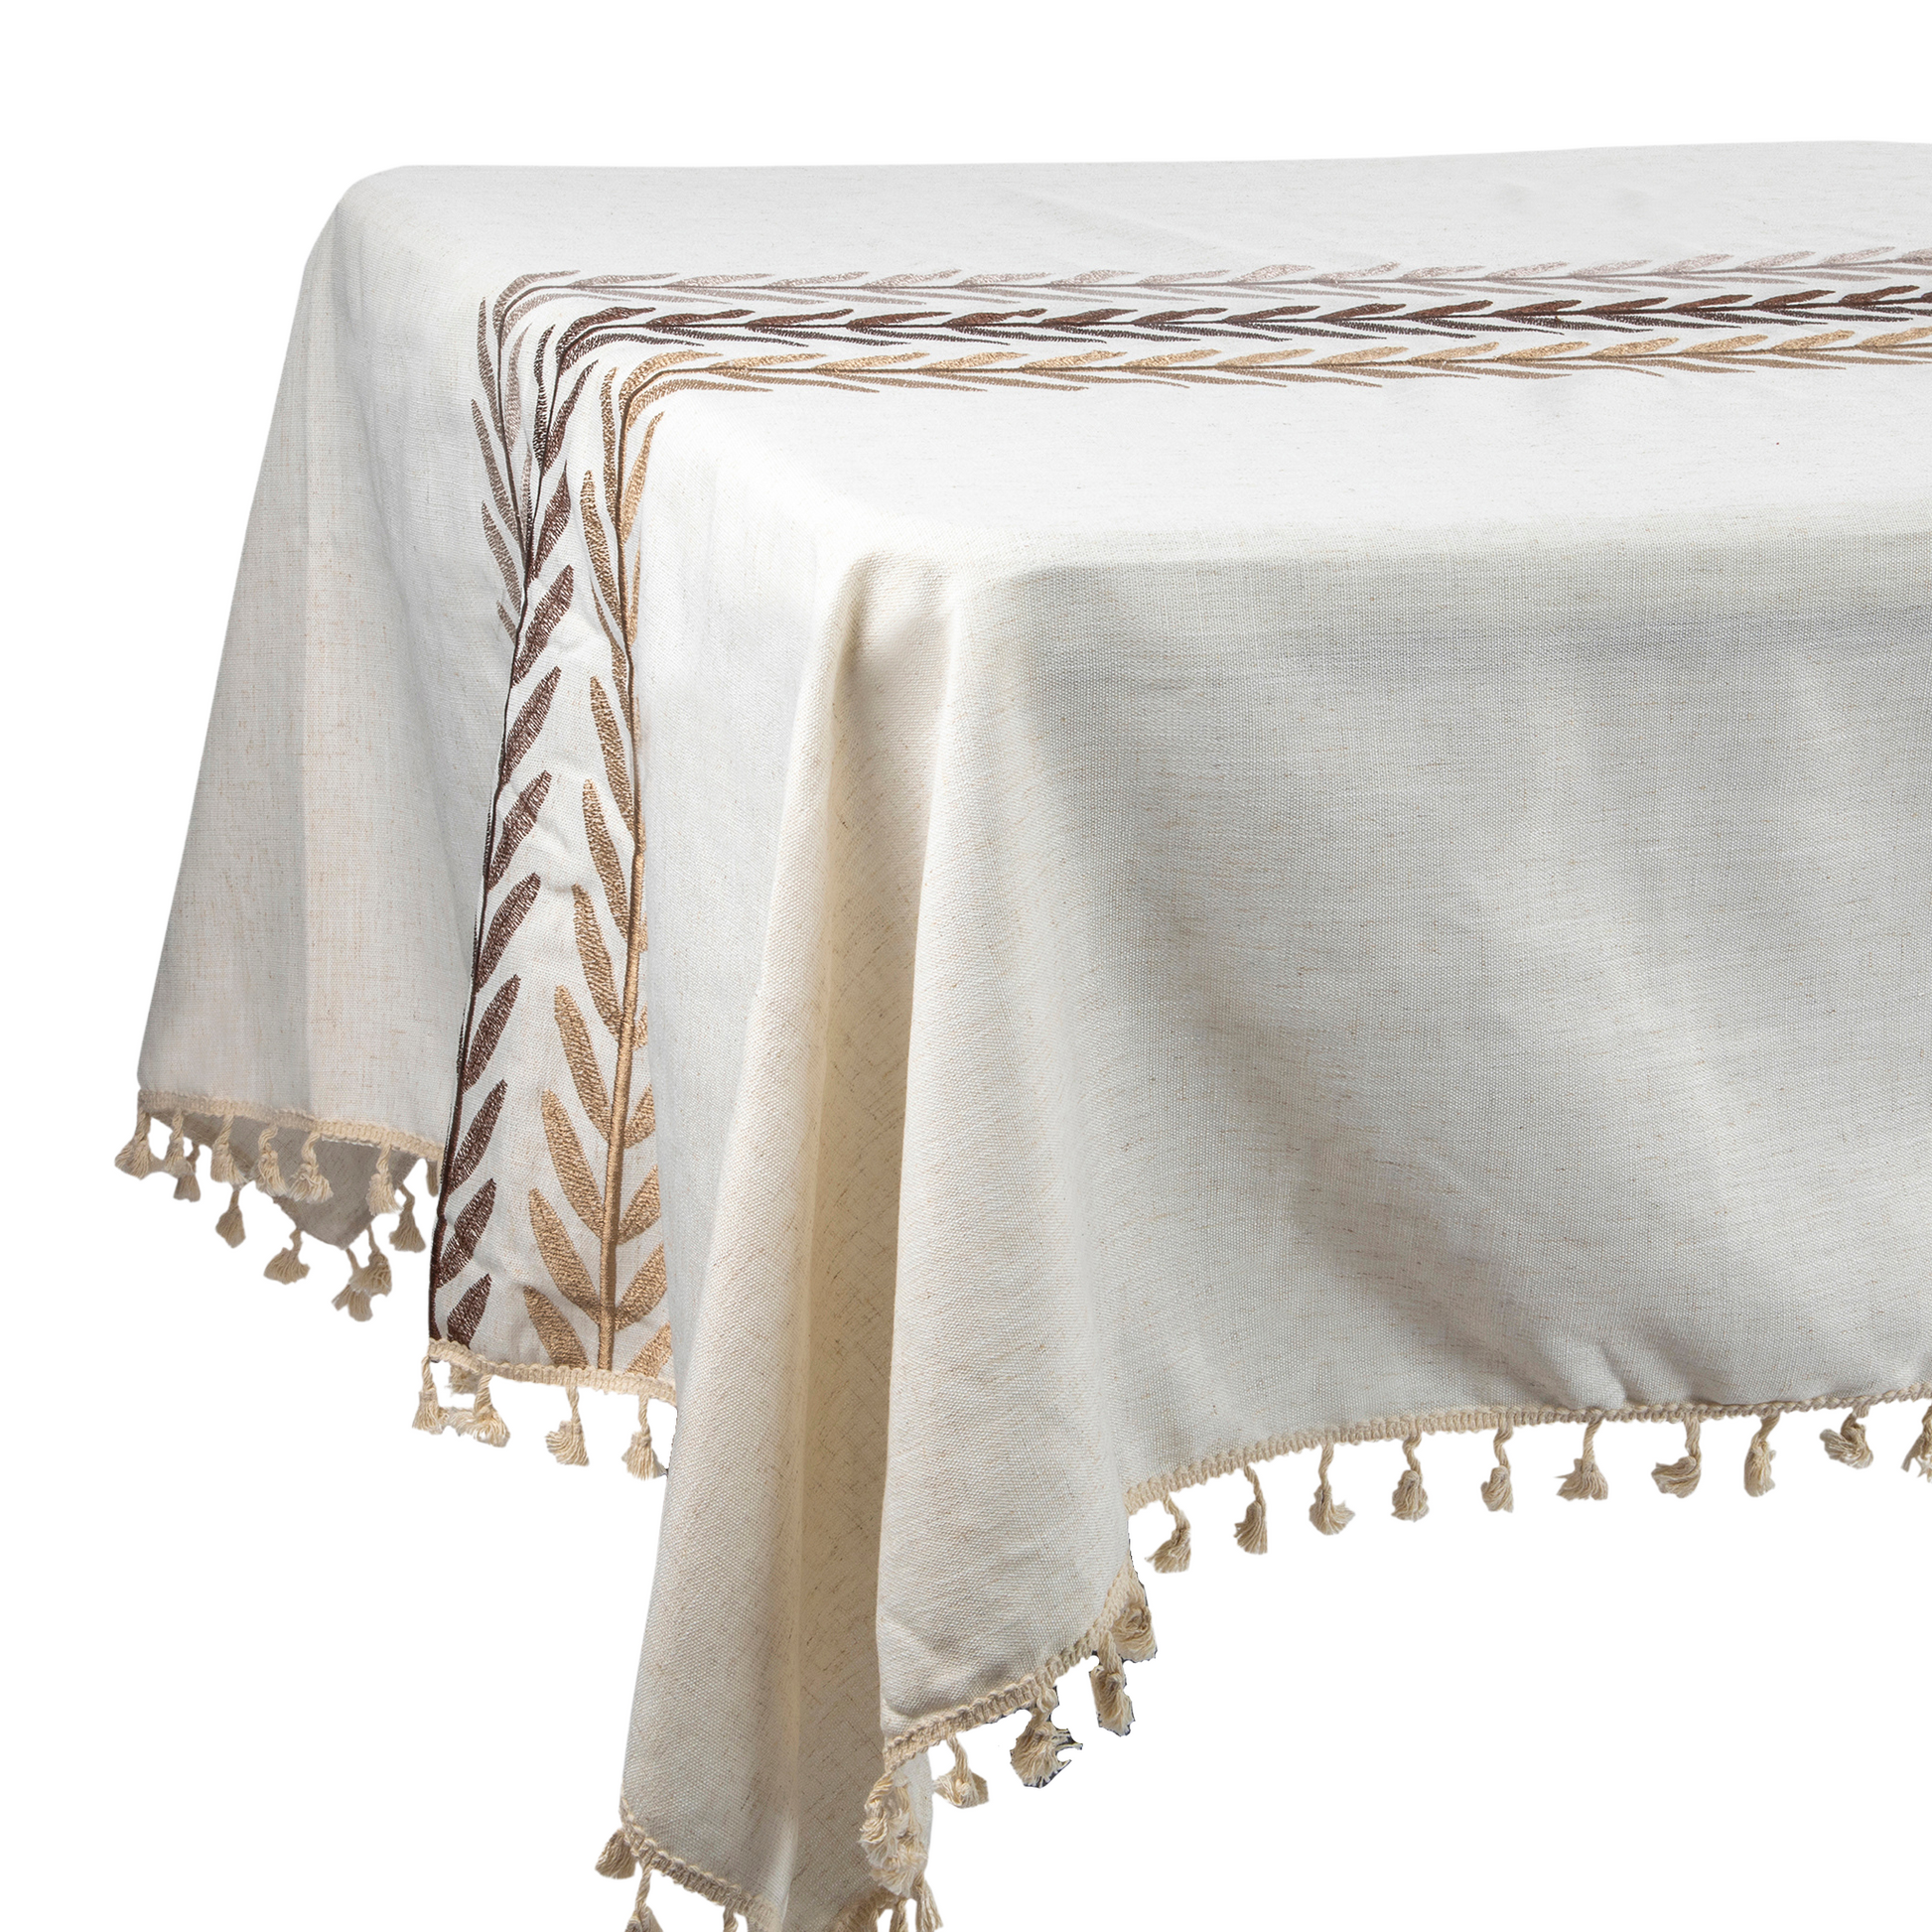 Bohemian Embroidered Leaves Tablecloth 57"x102" Rectangle